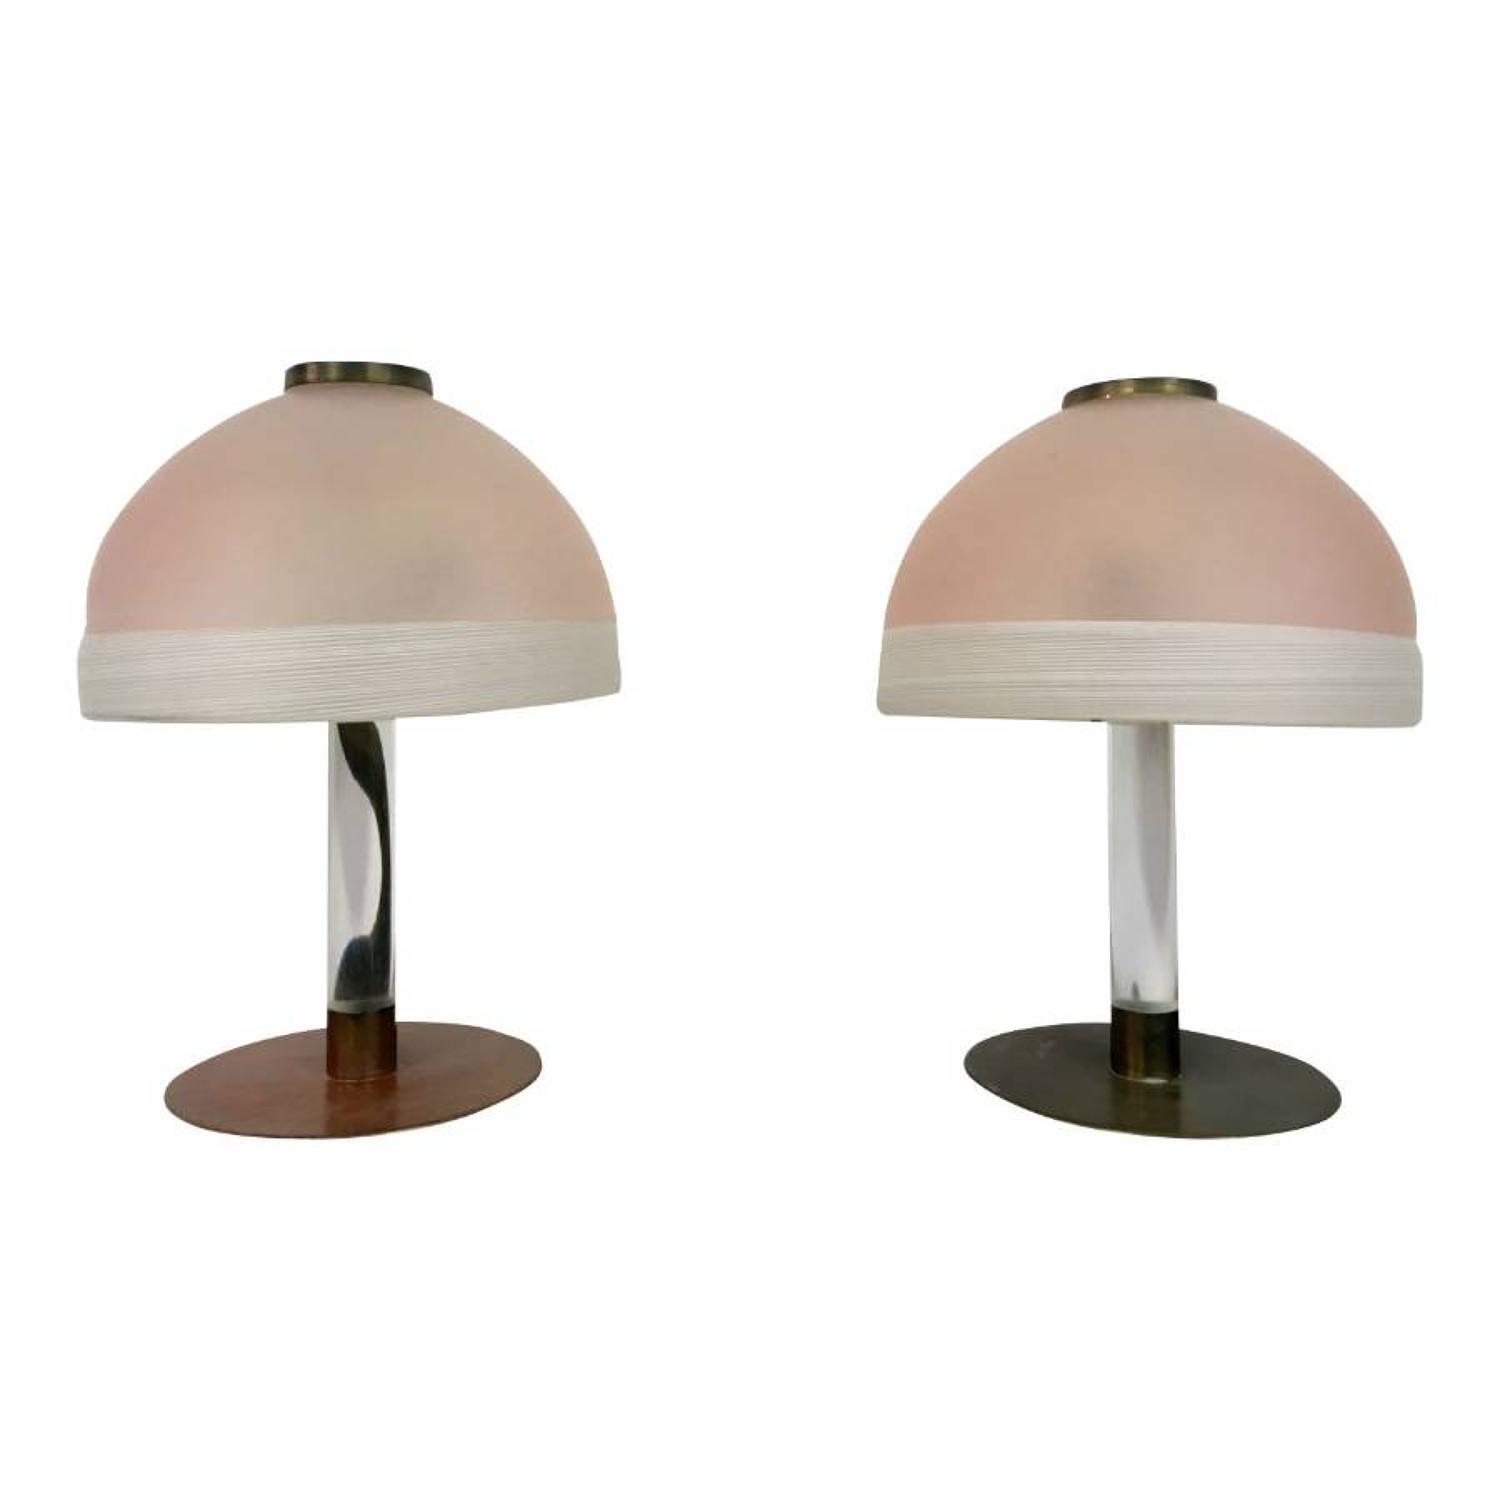 A pair of pink glass and lucite table lamps